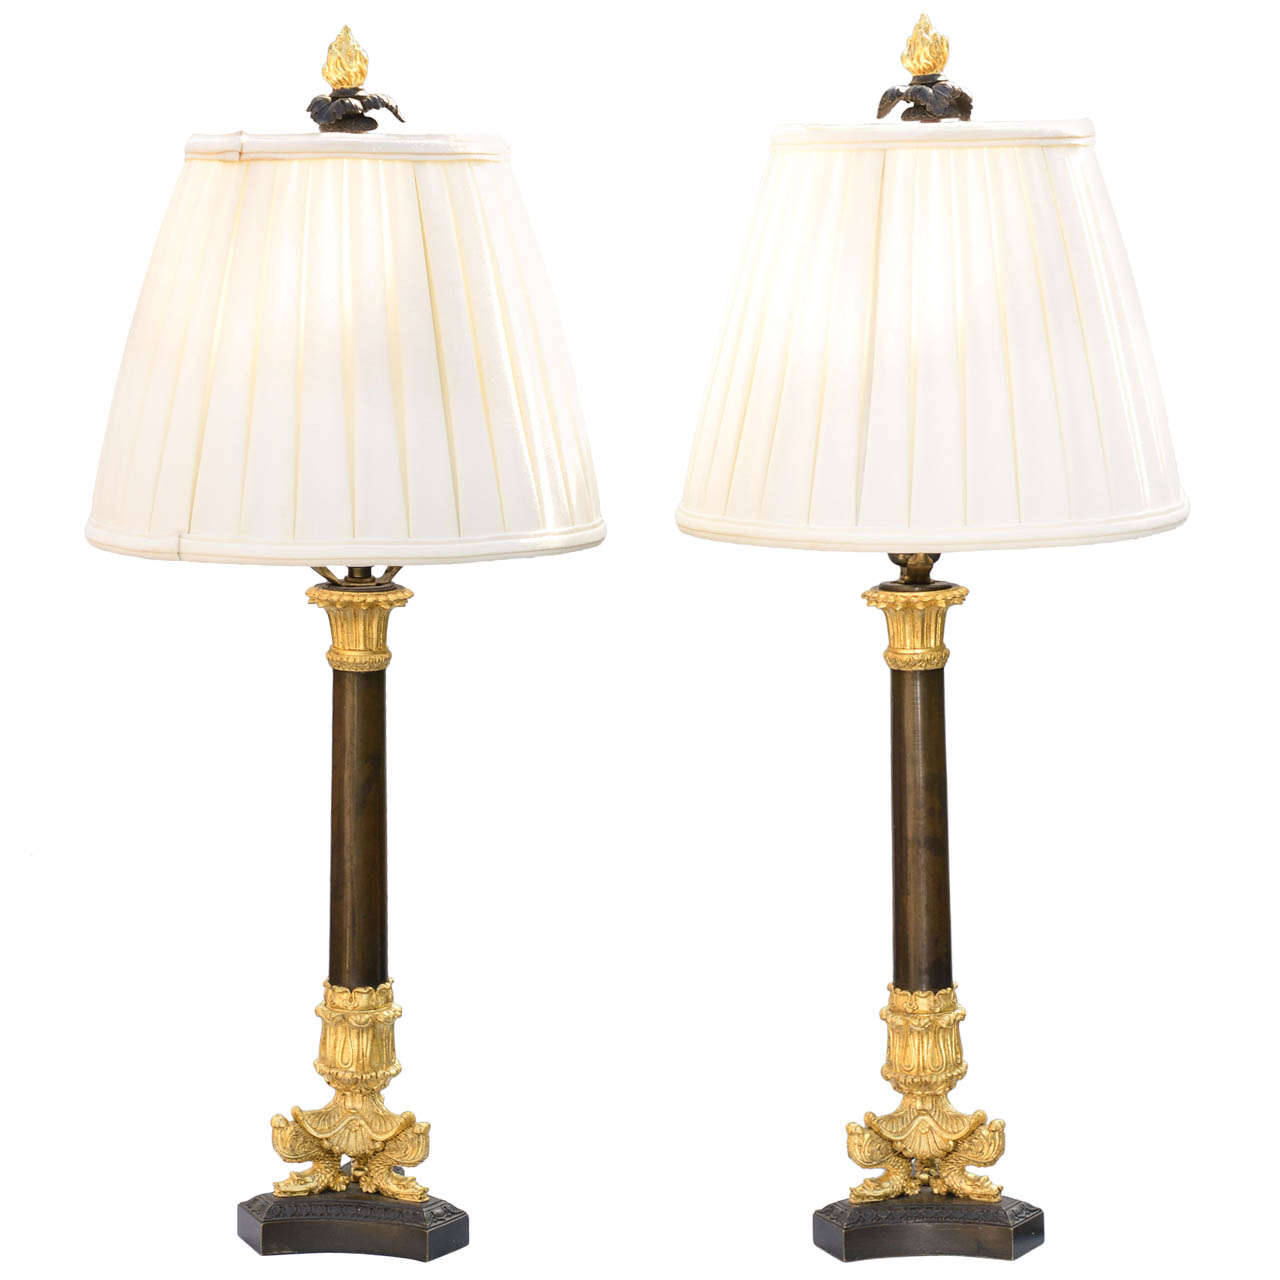 Fine Pair of 19c. French Bronze Column Lamps